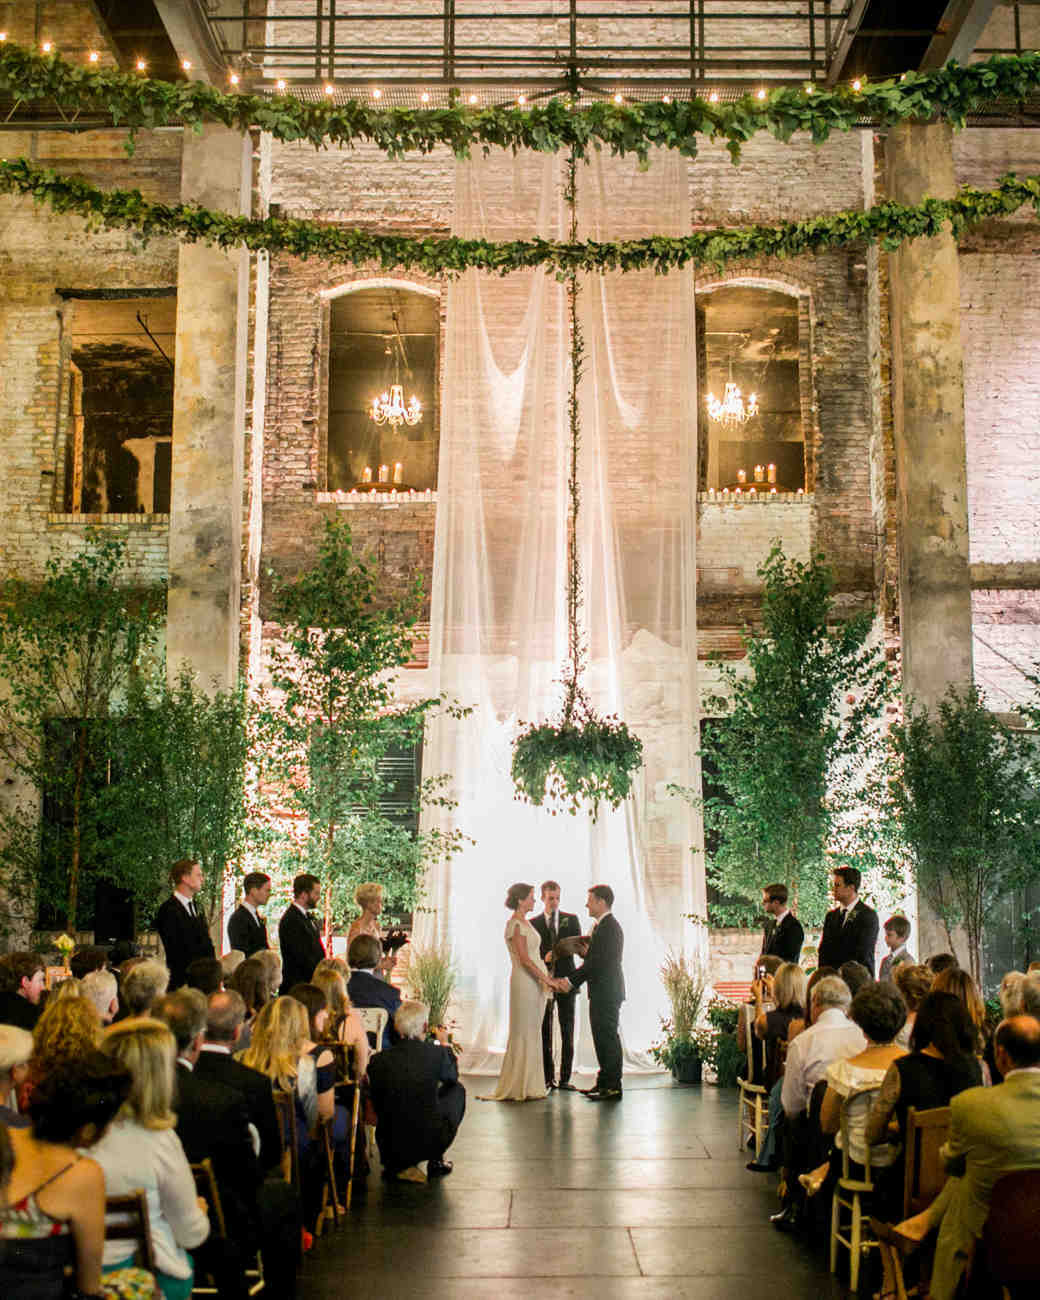 Wedding Ceremony Venues
 Restored Warehouses Where You Can Tie the Knot